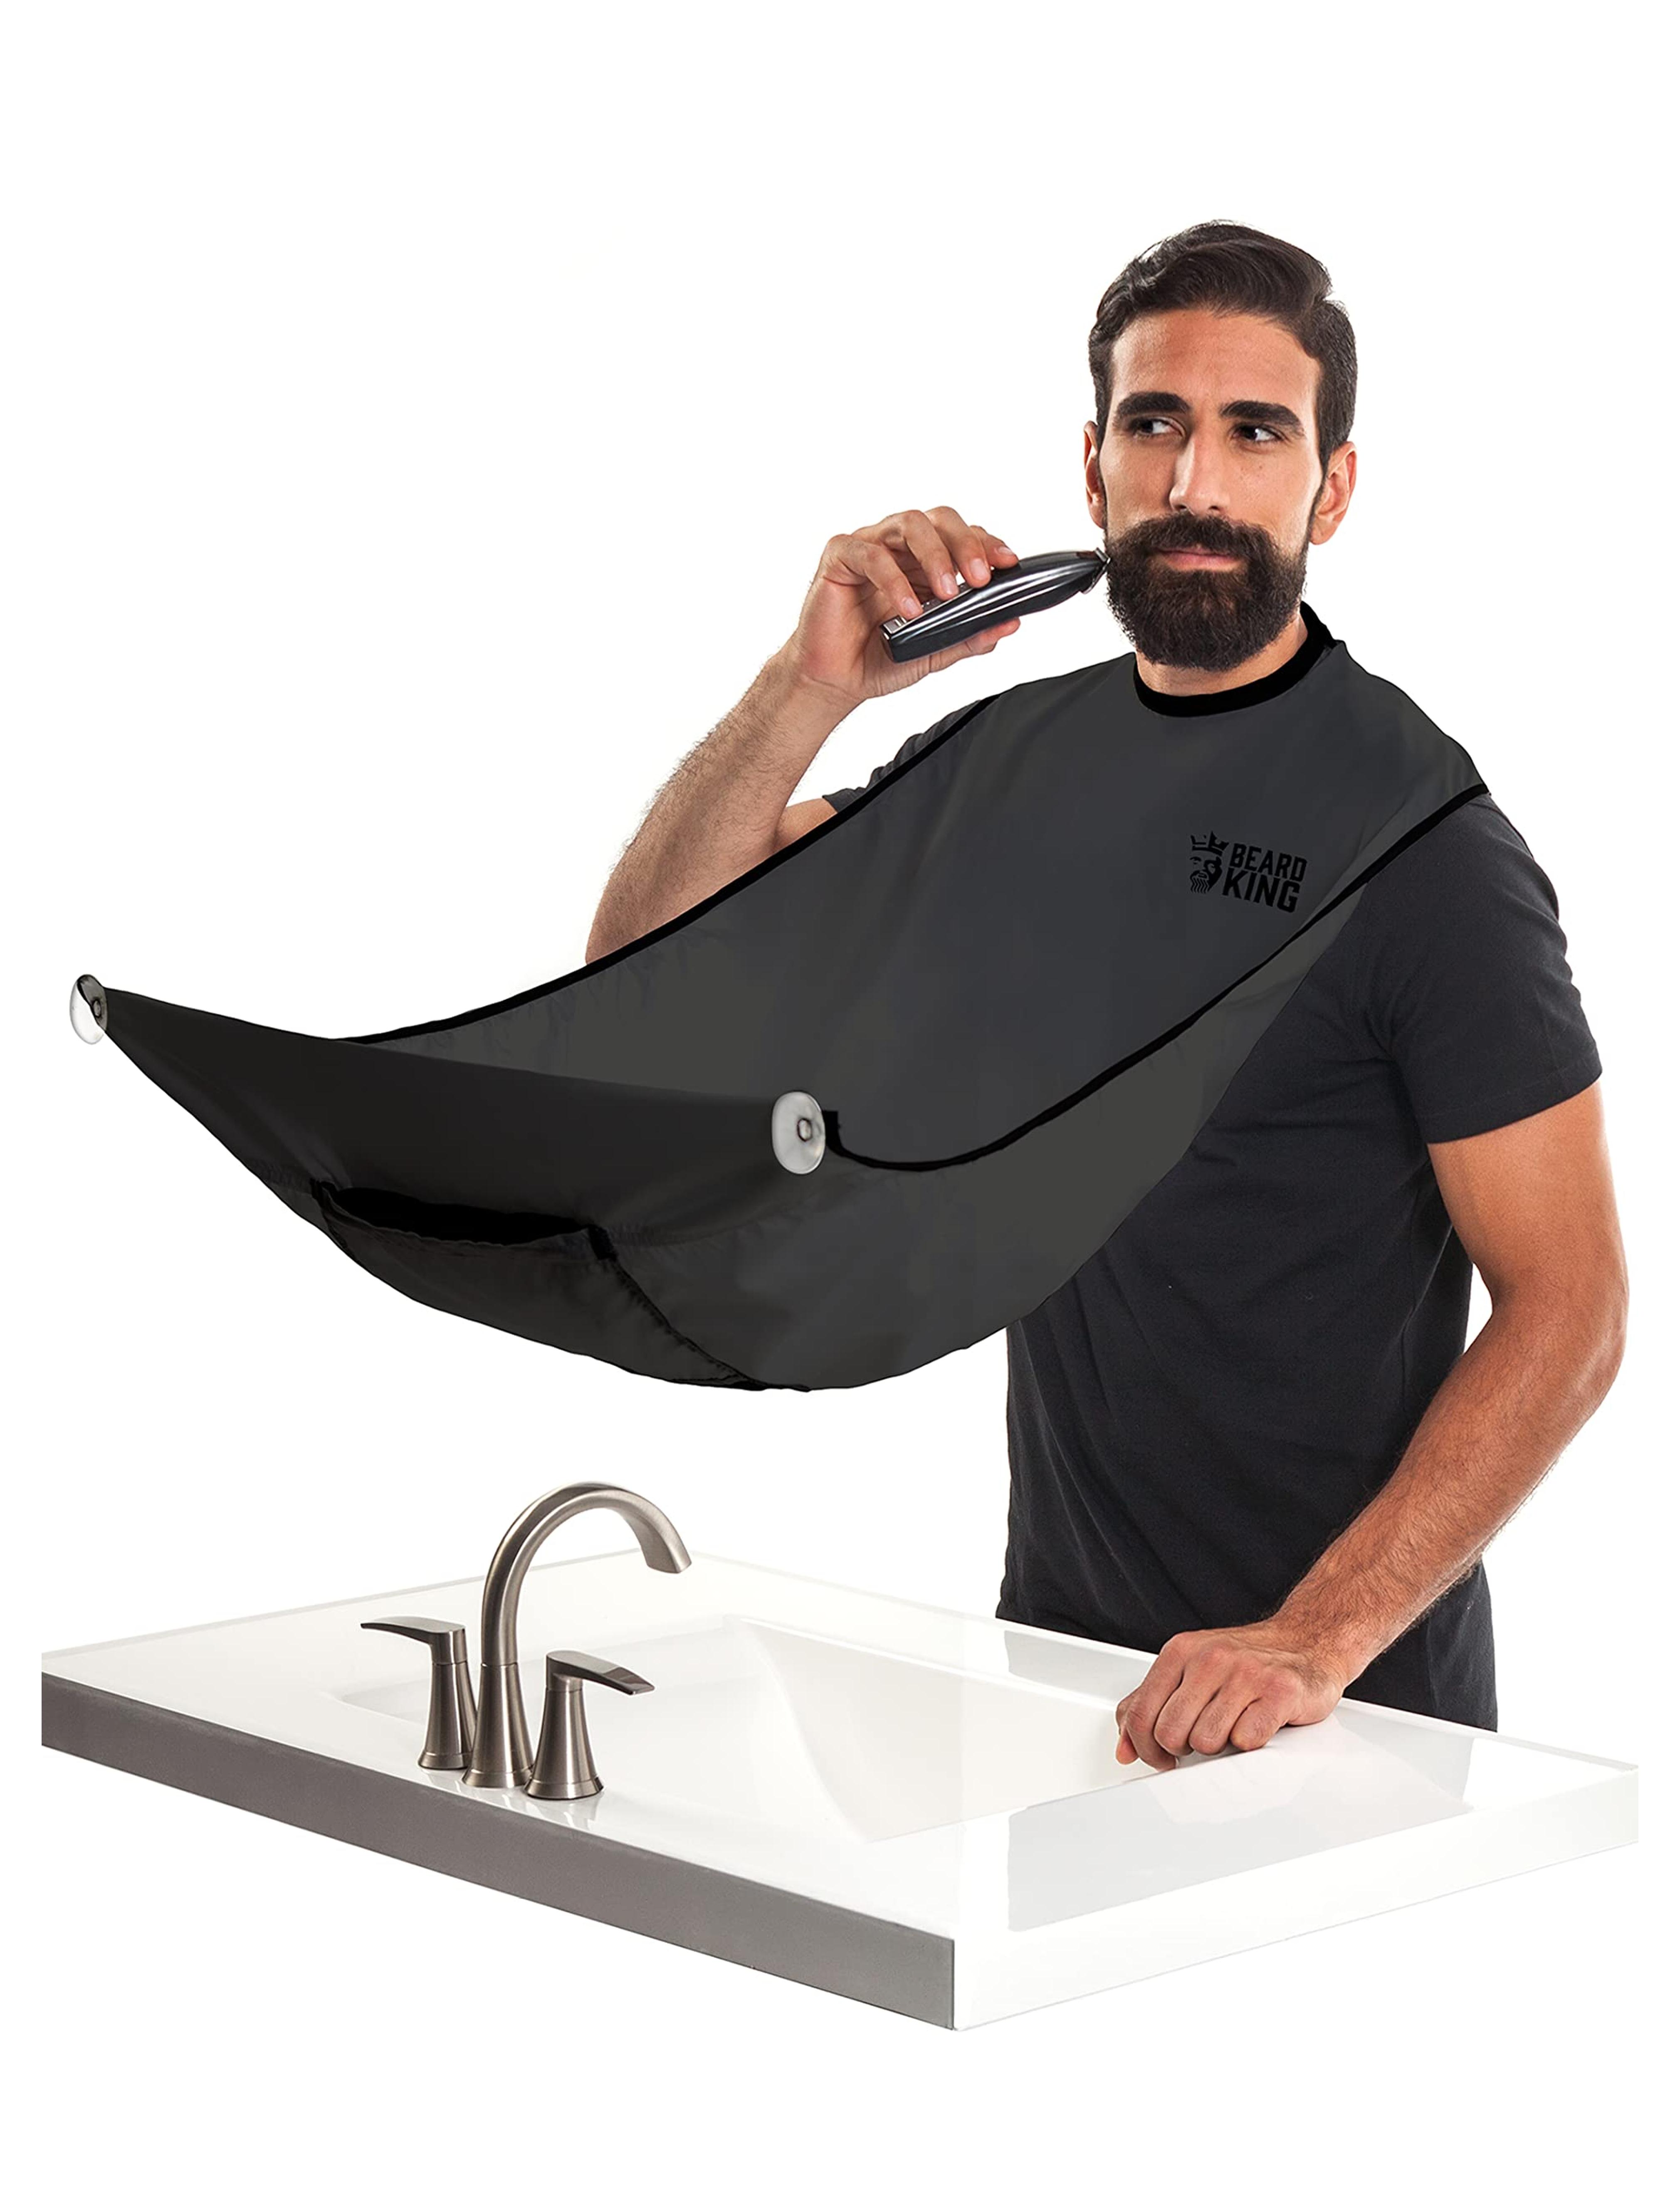 BEARD KING Beard Bib Apron for Men - the Original Cape As Seen on Shark Tank, Mens Hair Catcher for Shaving, Trimming - Grooming Accessories & Gifts for Dad or Husband - 1 Size Fits All, BLACK